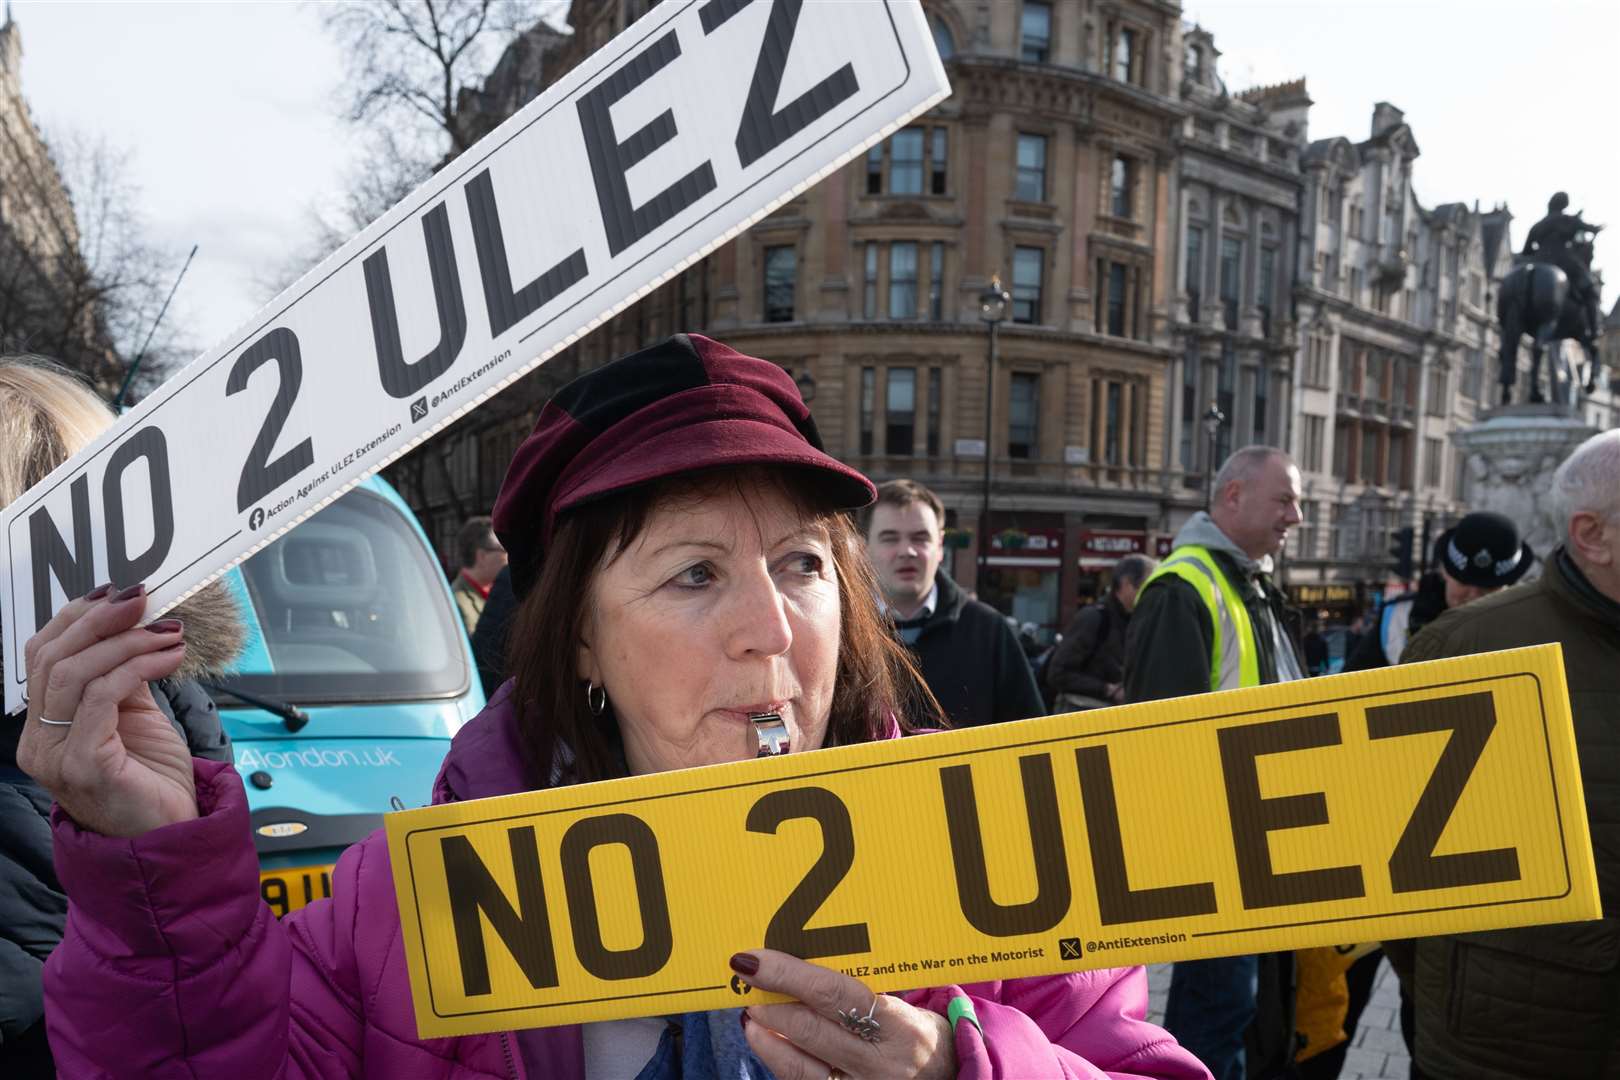 A woman blows a whistle during the protest in central London (Stefan Rousseau/PA)